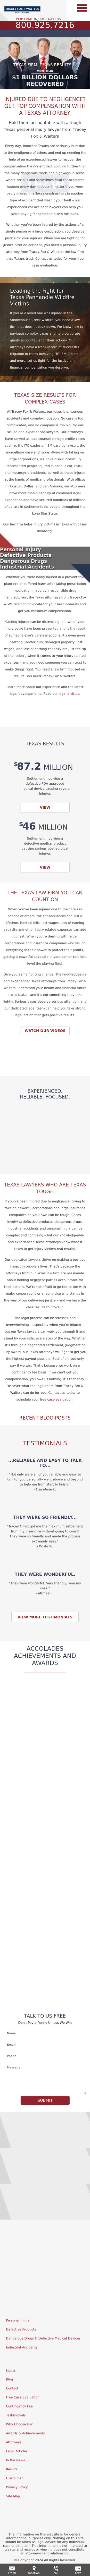 Tracey Law Firm - Houston TX Lawyers